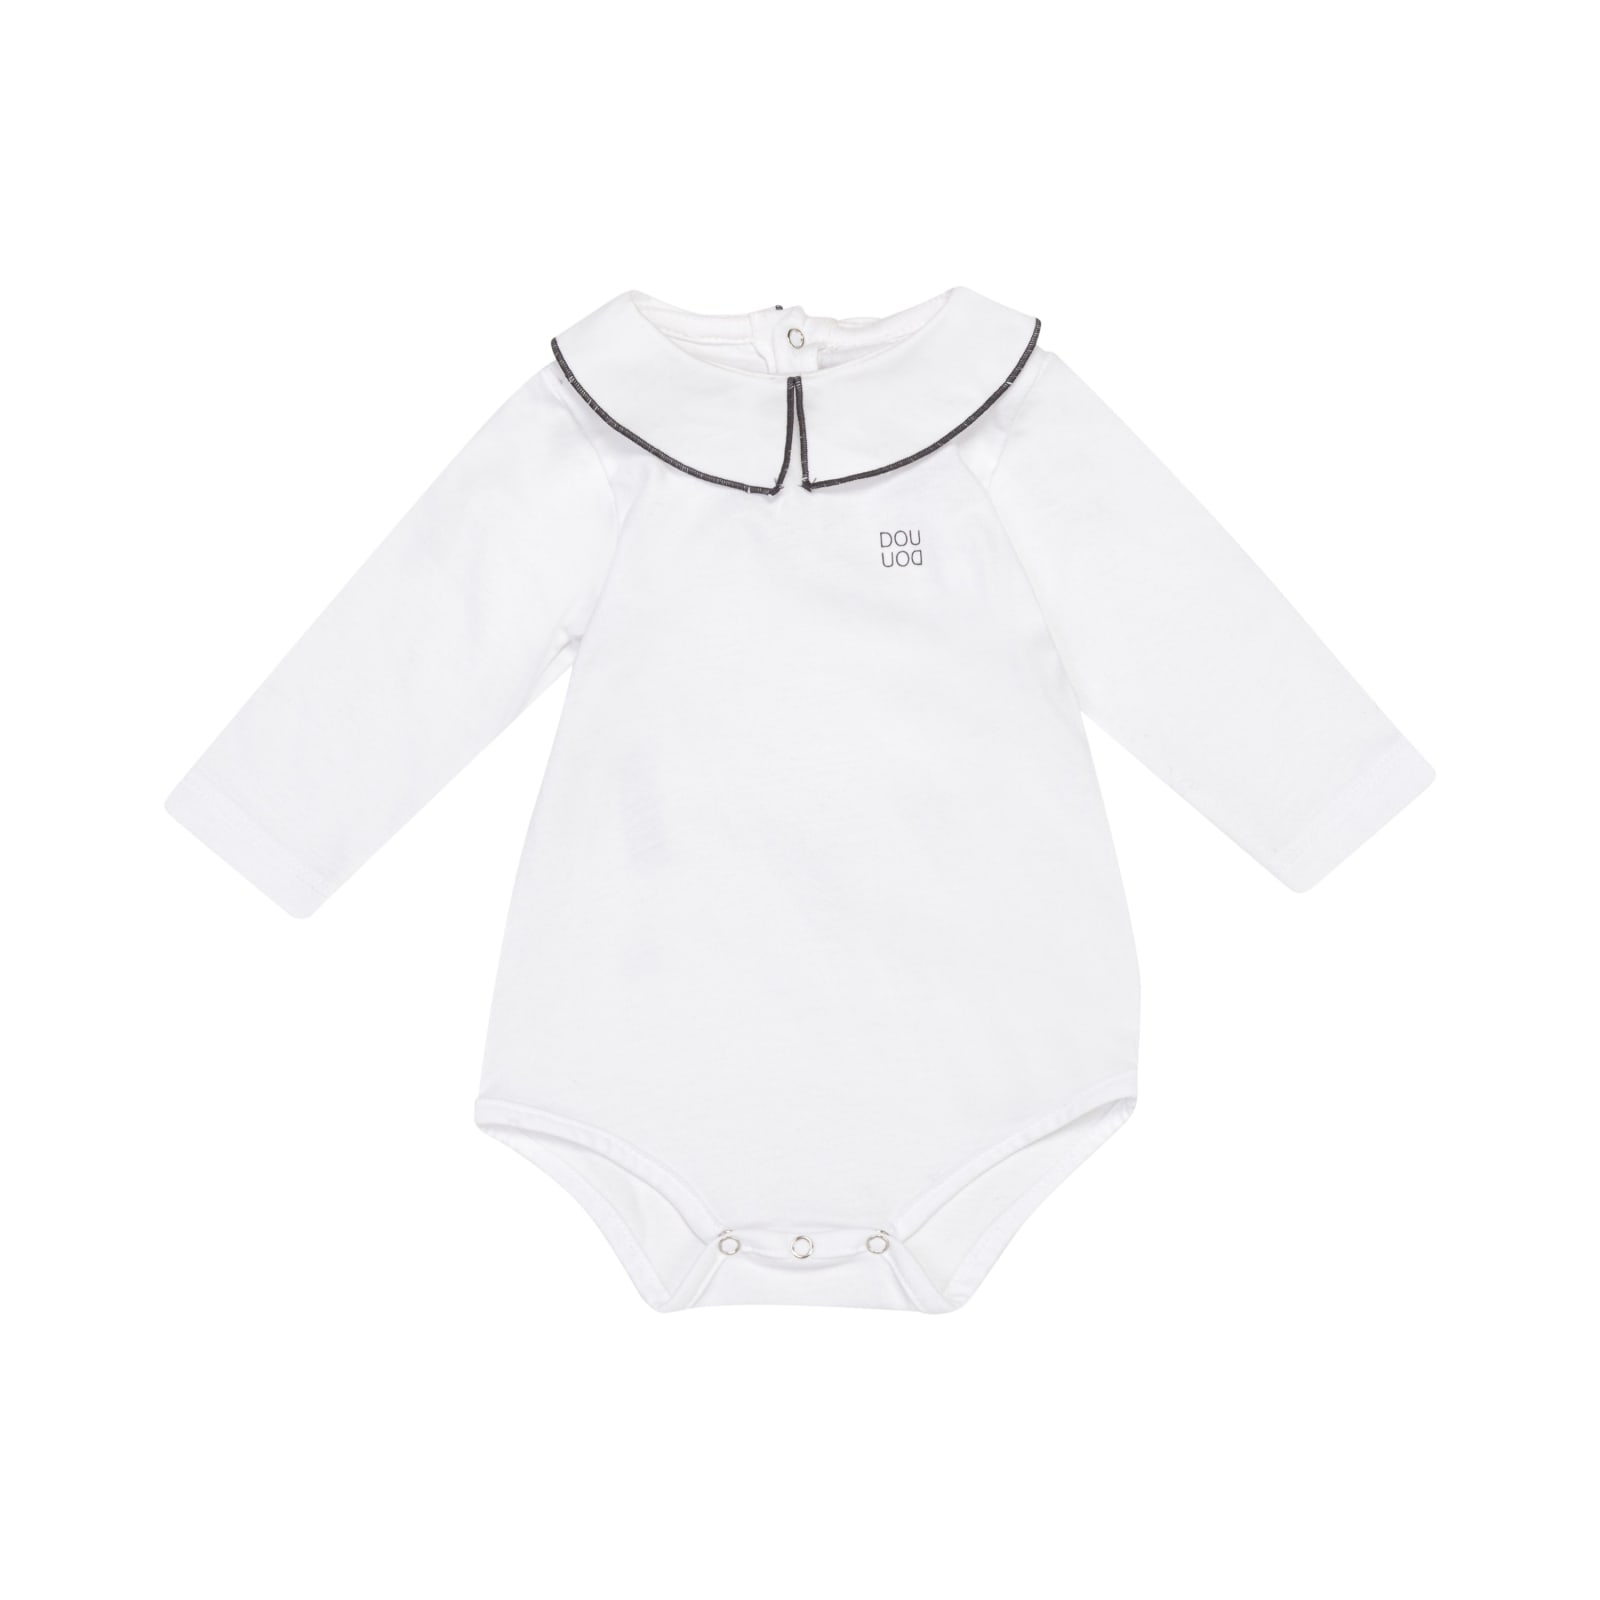 Douuod Babies' Flared Trousers With Metallic Effect In White